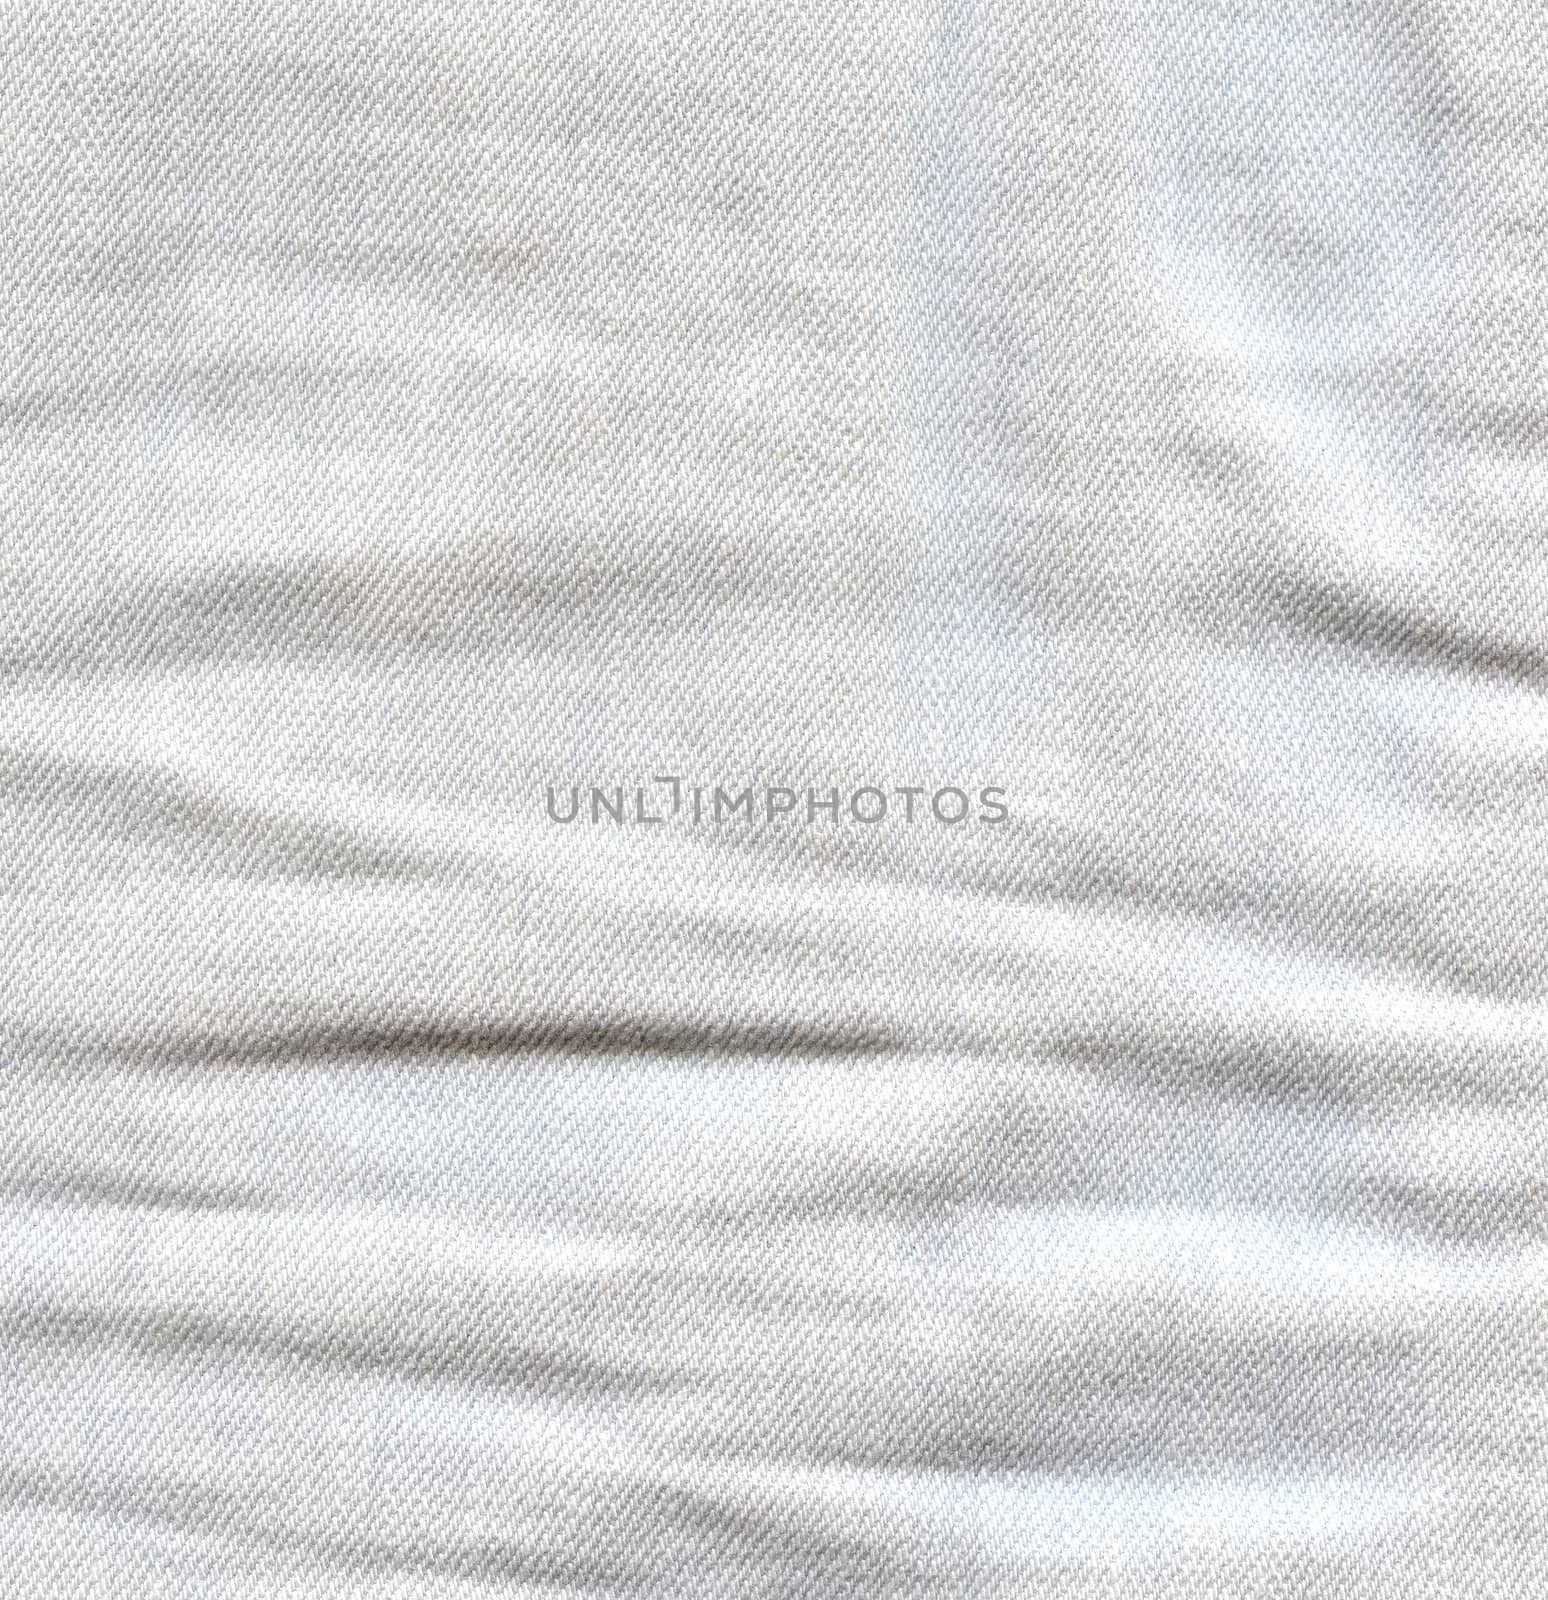 Light crumpled jeans background. Creased denim surface. White gray color canvas texture 